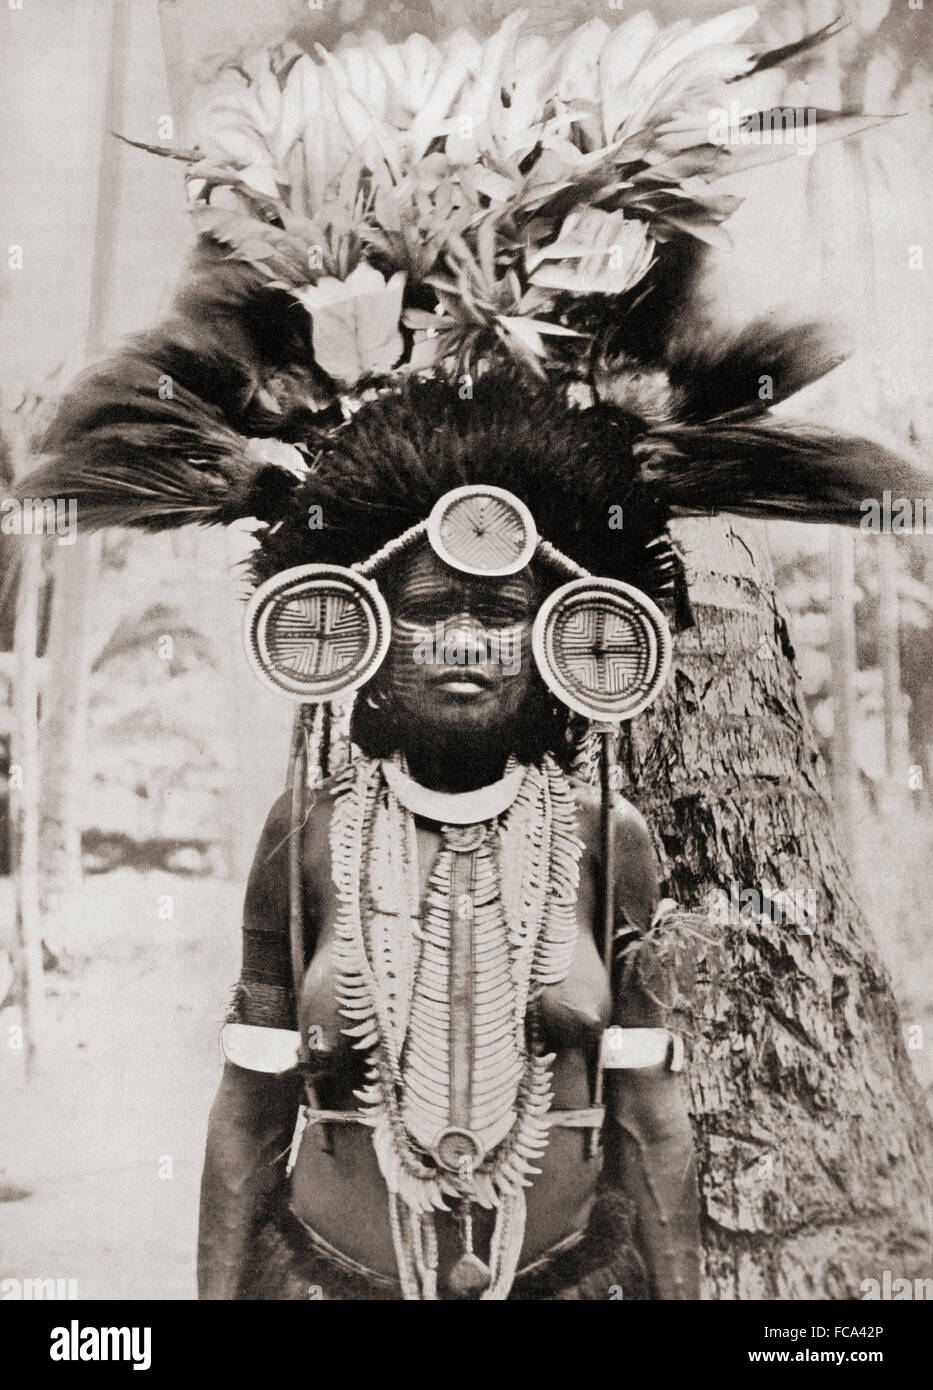 A woman of the Roro tribe from Papua New Guinea, Melanesia, decorated for a ceremonial dance.  From a 19th century photograph. Stock Photo